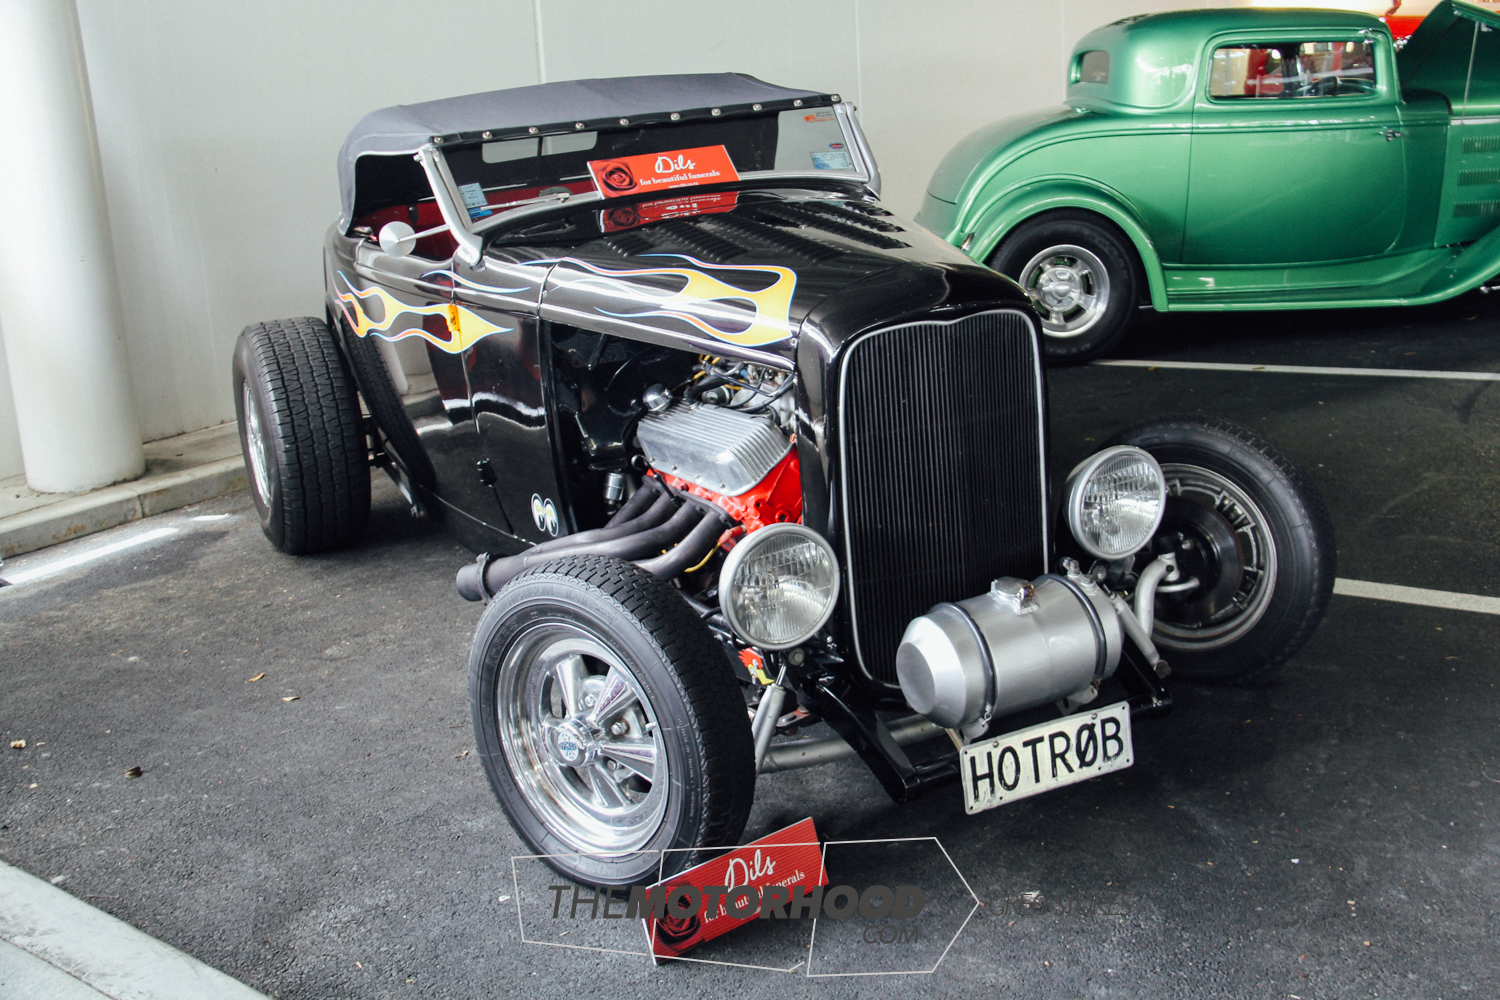    Rob Medemblik’s ’32 Ford Roadster is tough with a 427ci big block Chev and flames over black. Another classic hot rod roadster   